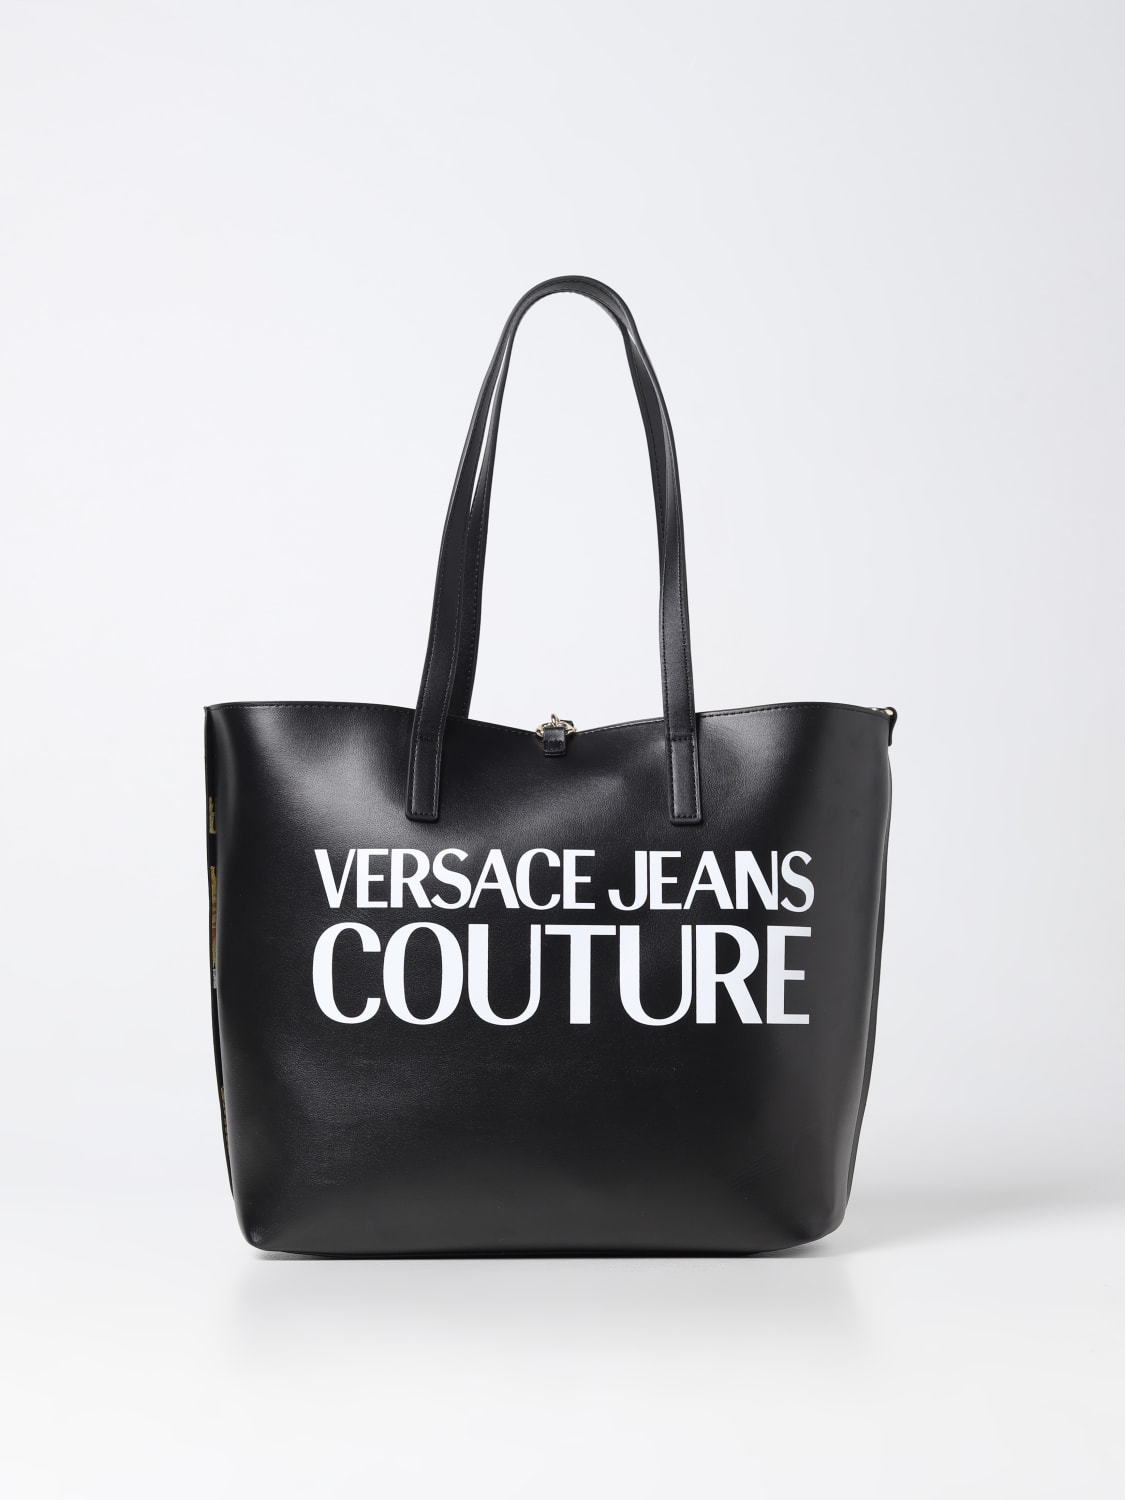 VERSACE JEANS COUTURE トートバッグ ブラックディテール